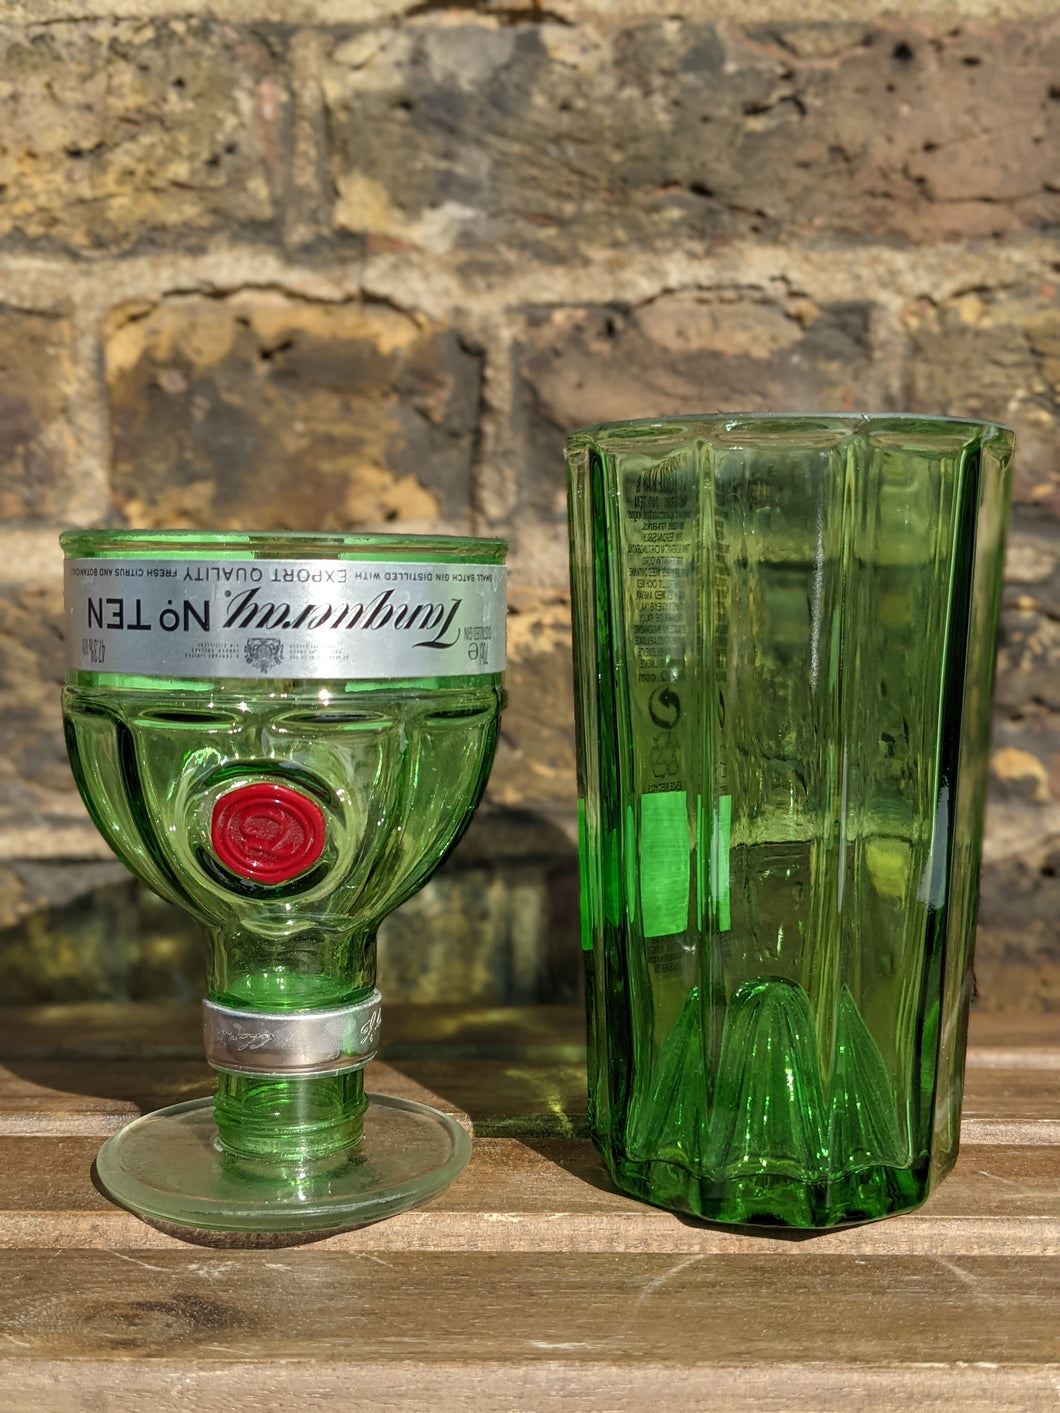 Tanqueray No. 10 gin bottle glasses